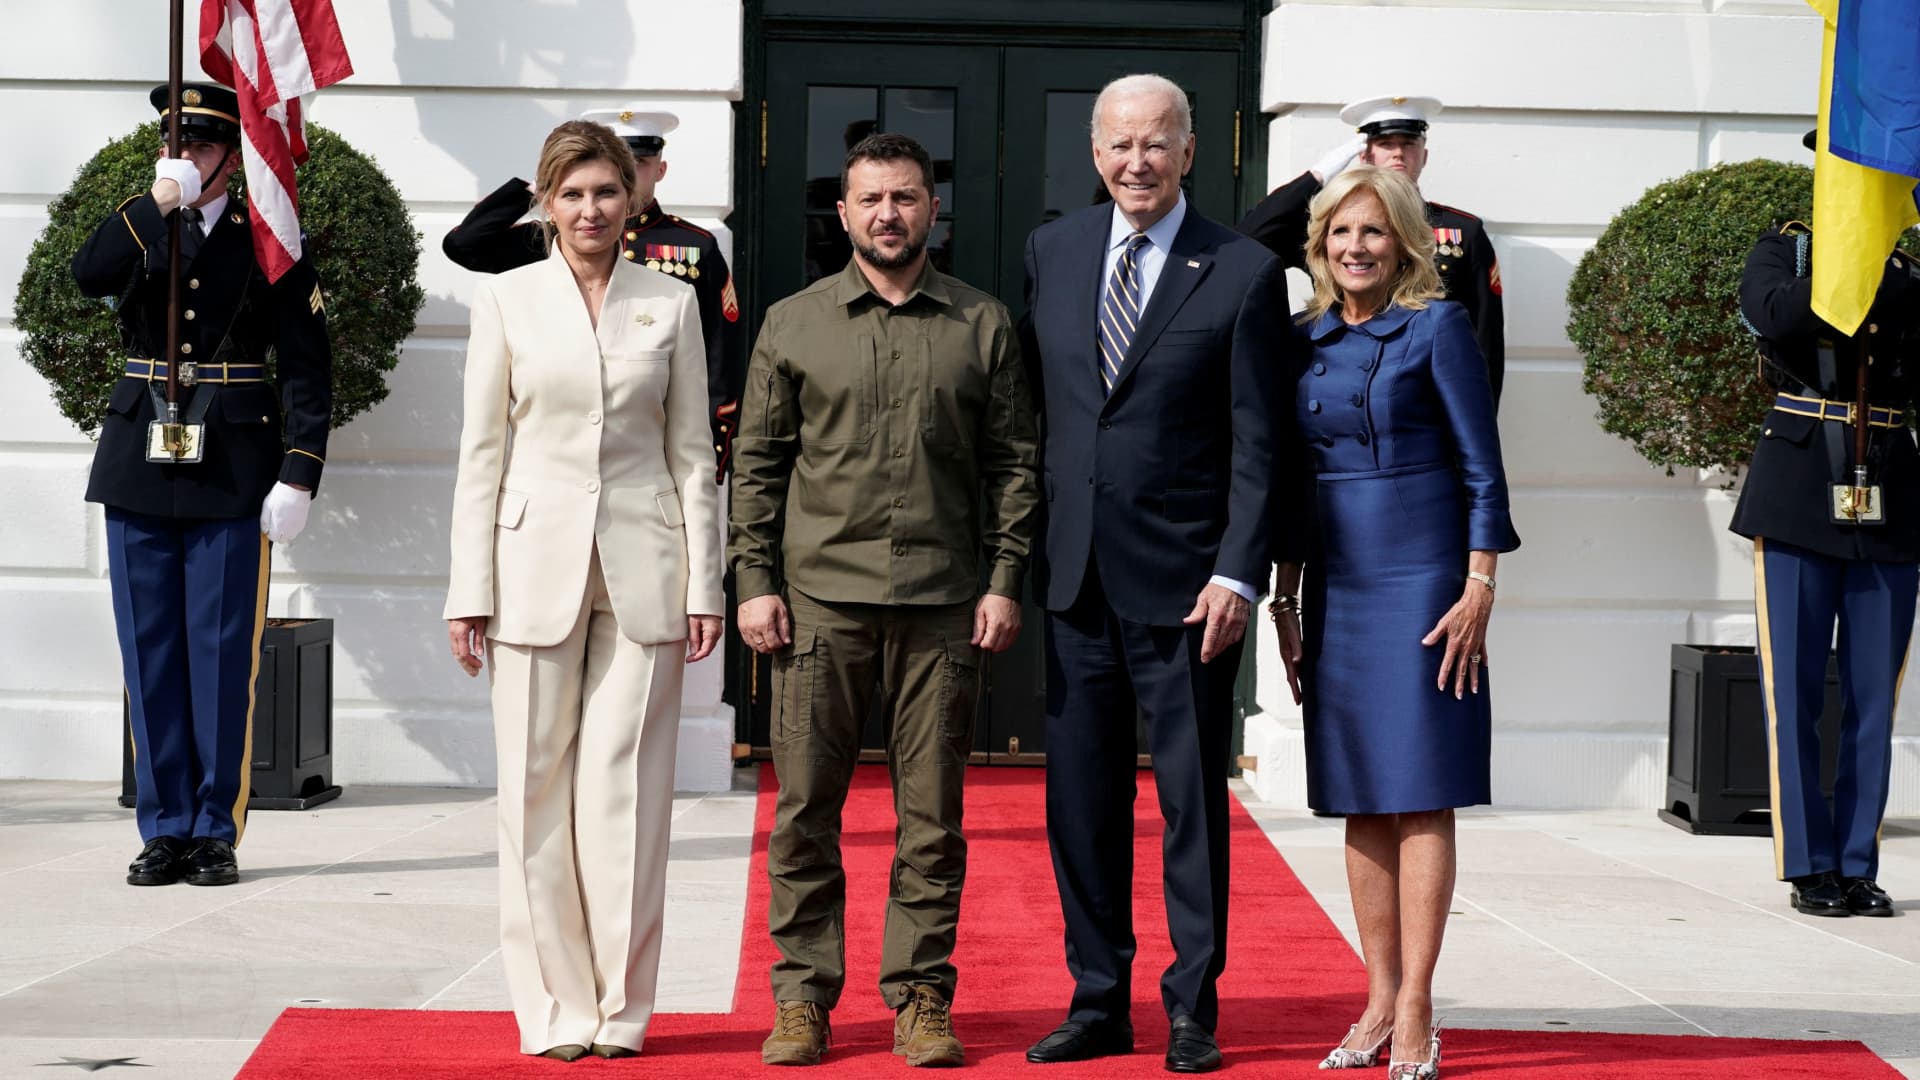 U.S. President Joe Biden and first lady Jill Biden welcome Ukrainian President Volodymyr Zelenskyy and his wife Olena as they arrive at the White House in Washington, September 21, 2023.